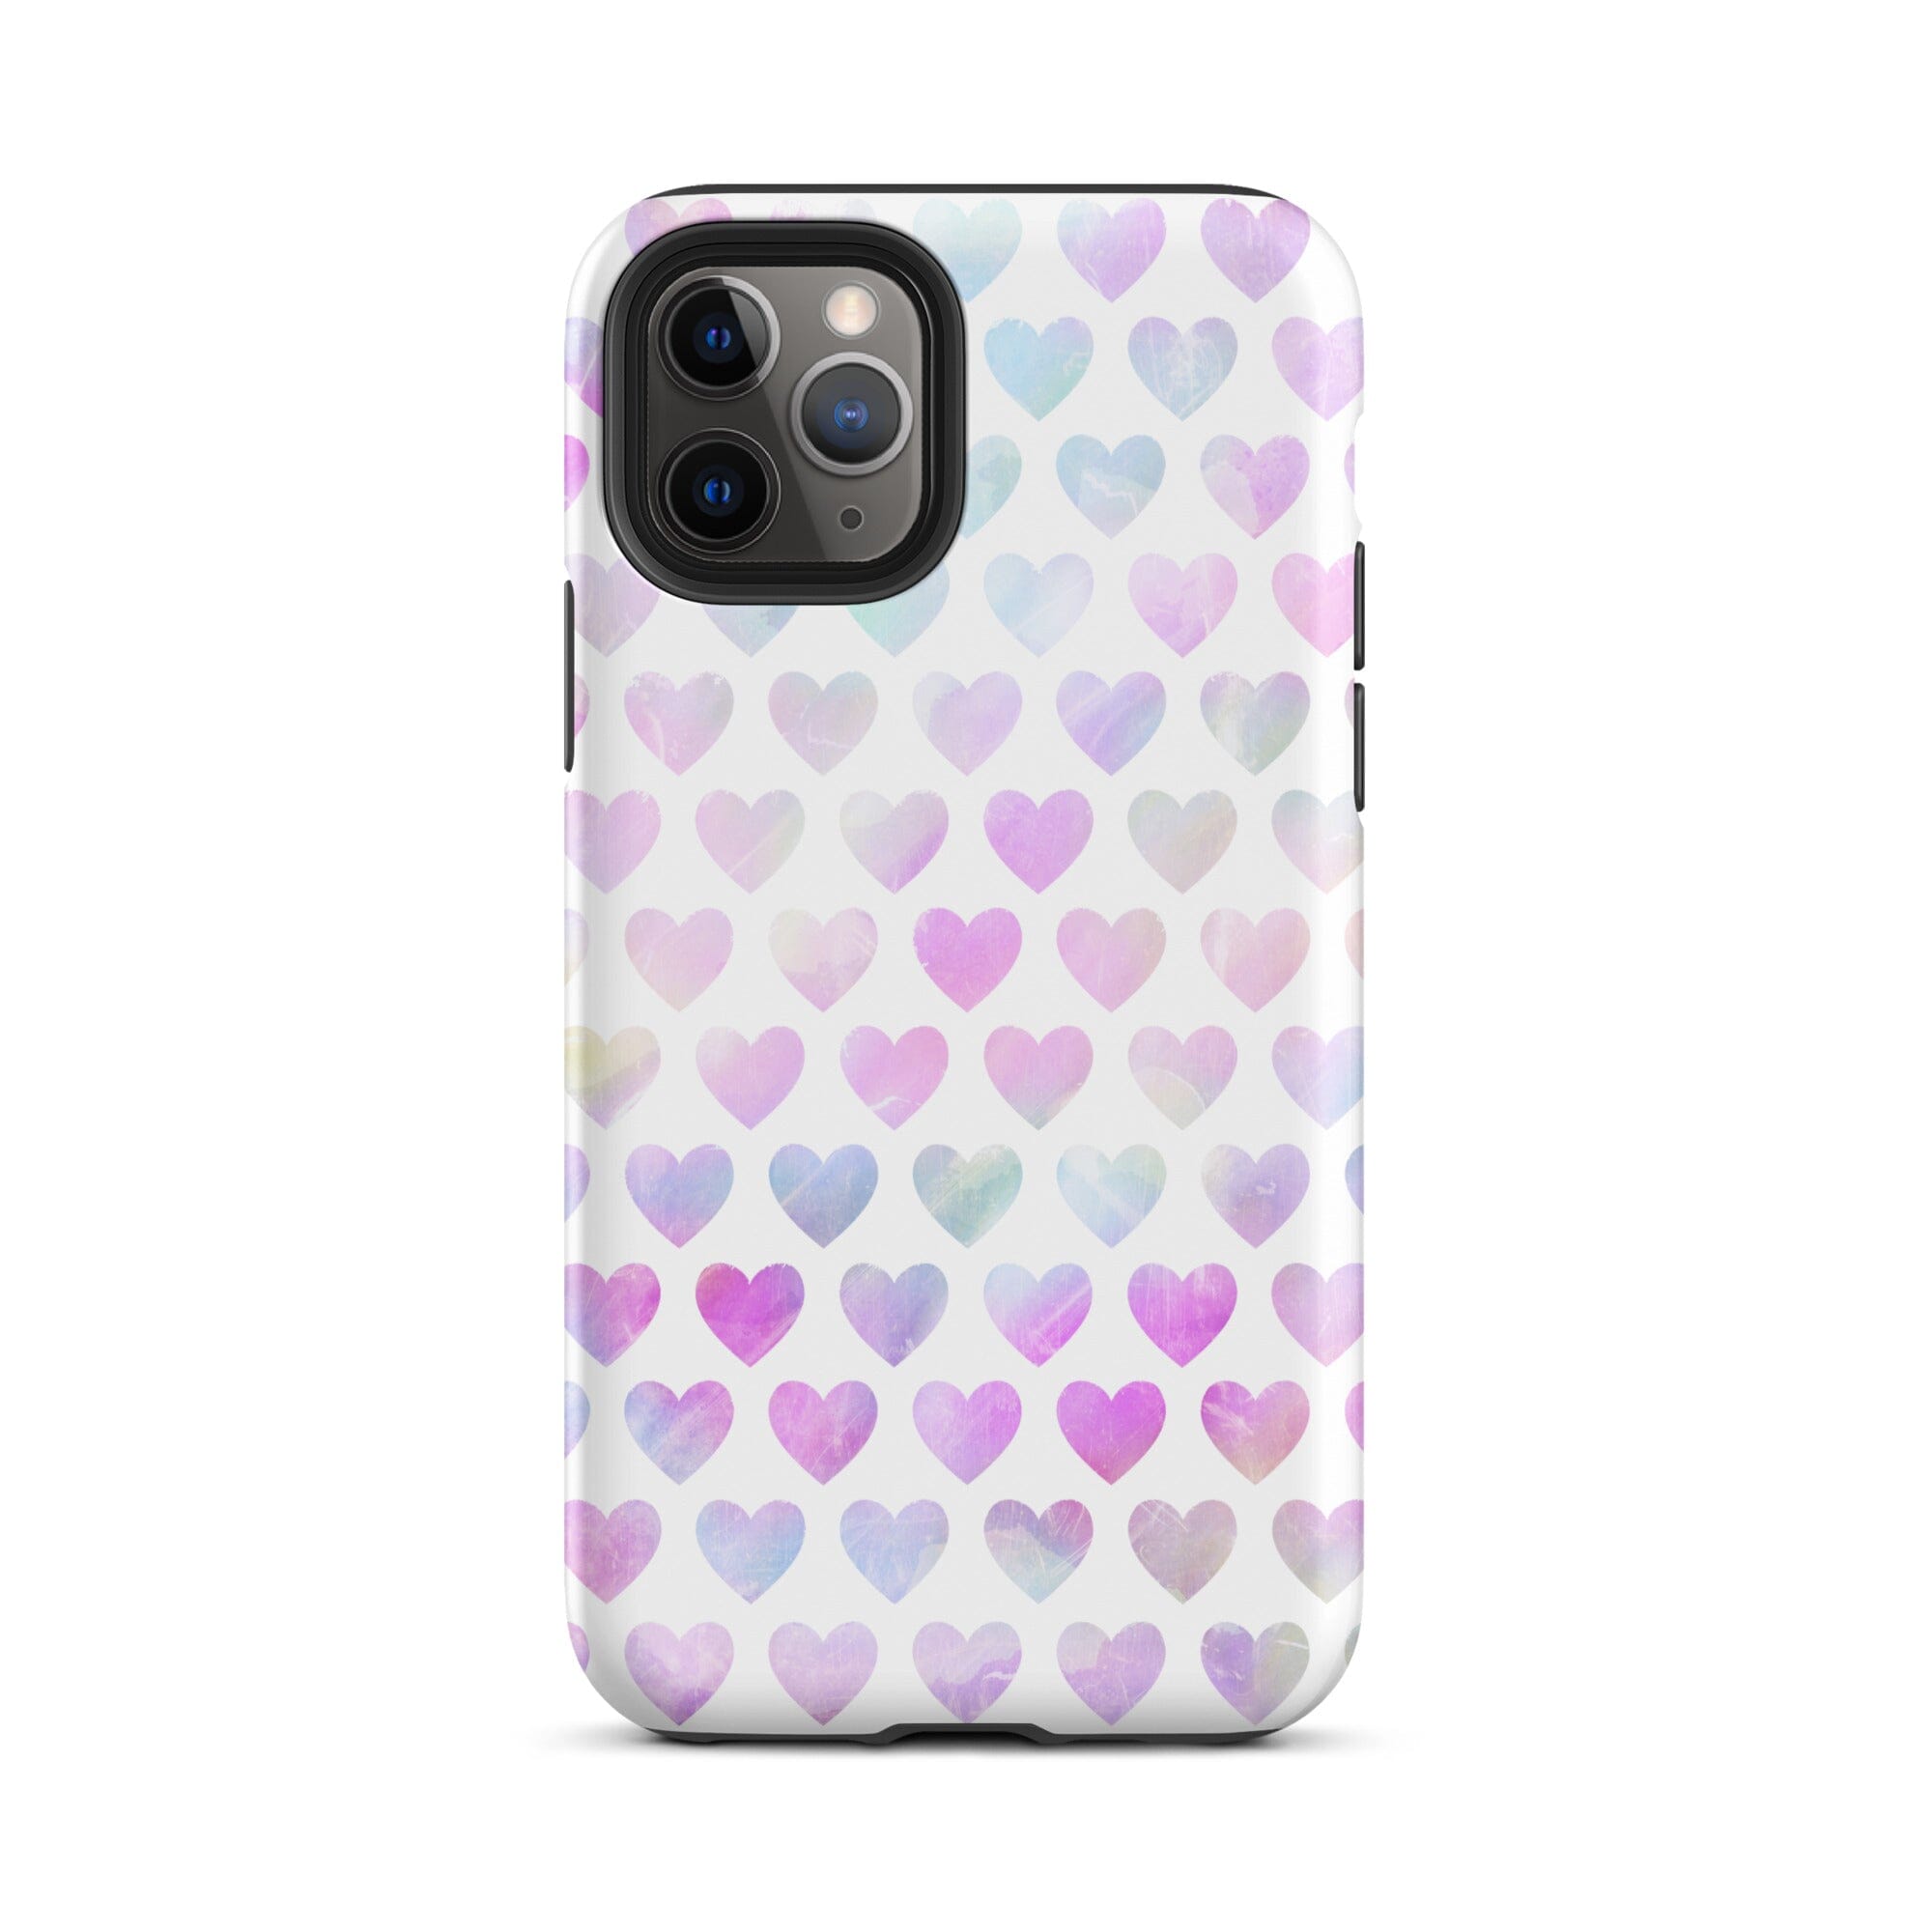 Pastel Hearts iPhone Case - KBB Exclusive Knitted Belle Boutique iPhone 11 